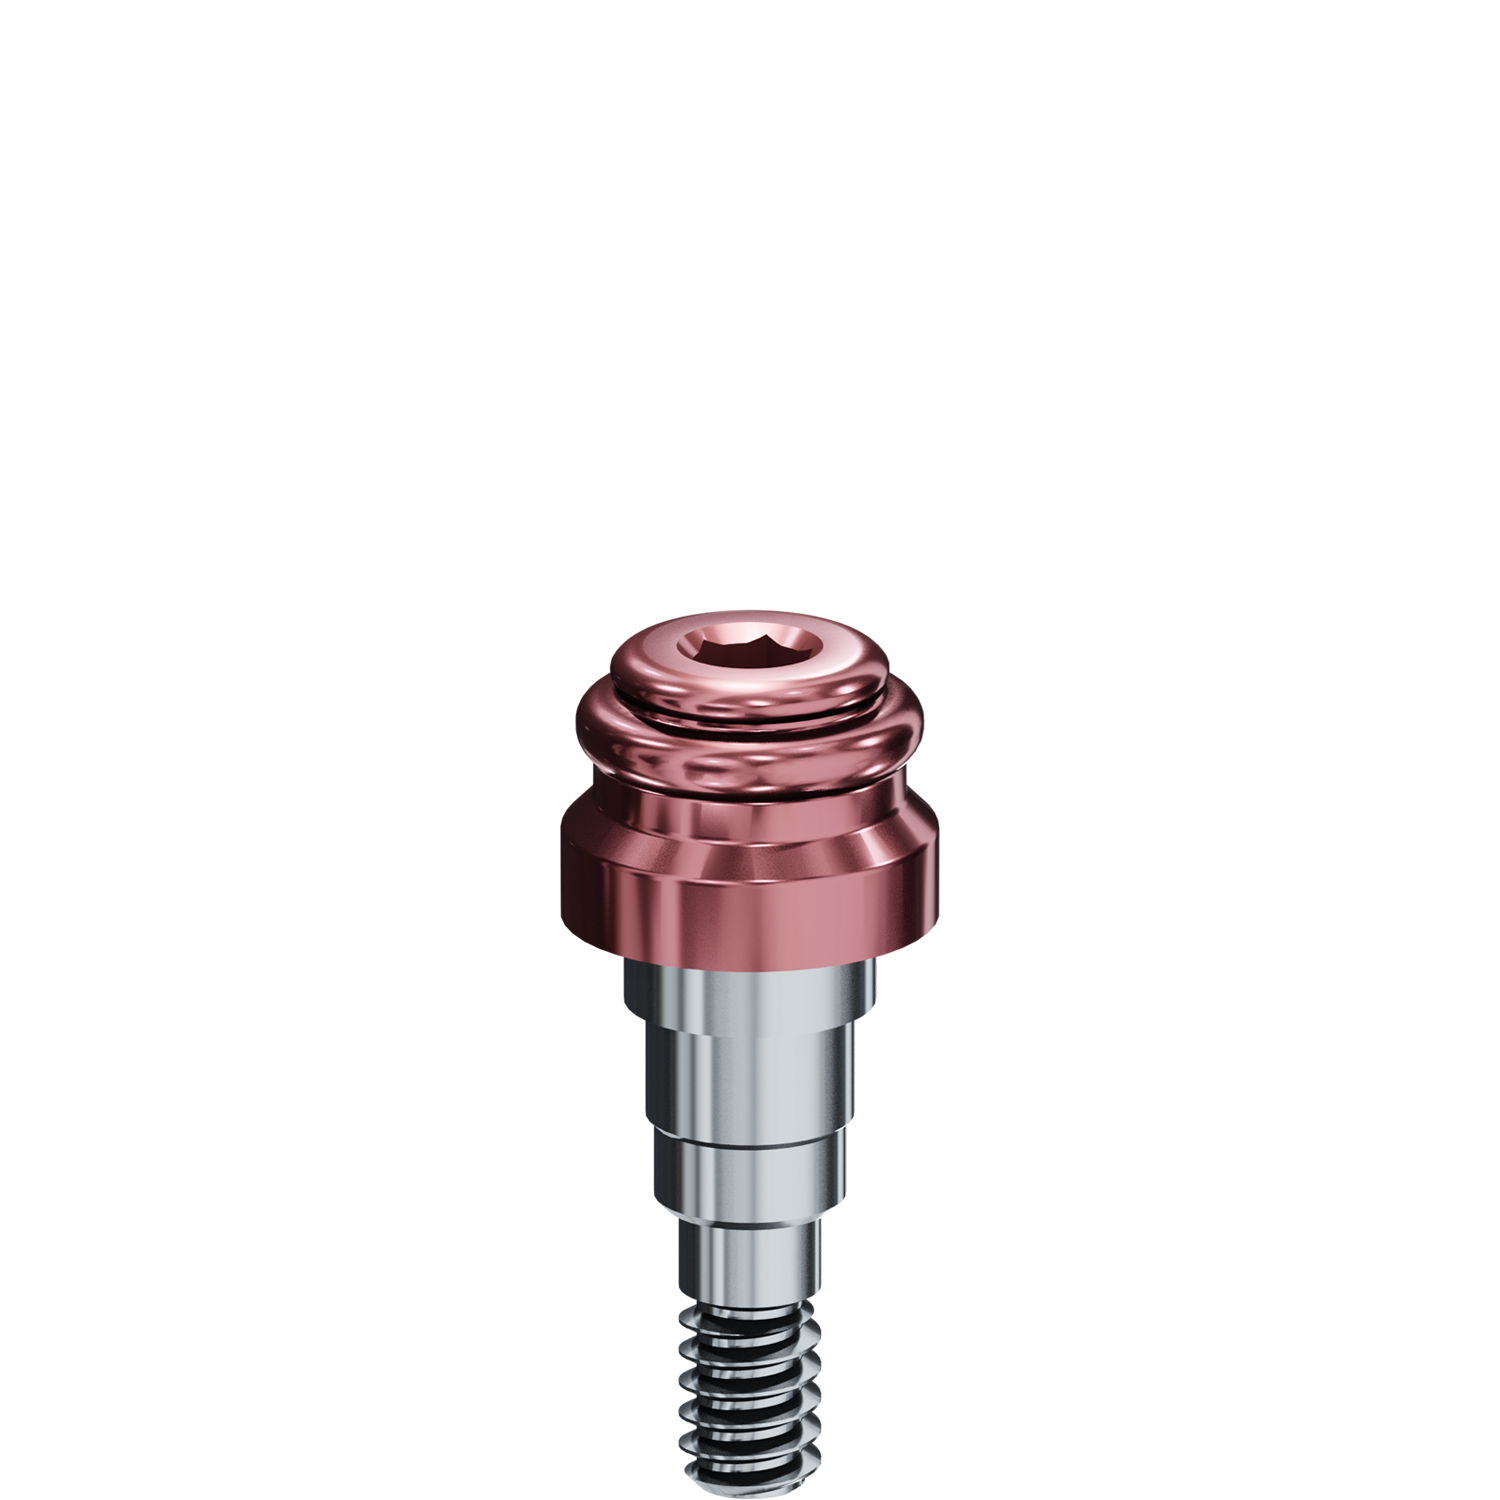 R-Tx Attachment System - Biomet 3i® - 4.1mm Certain Connection - 0.048" Drive - 6.0mm